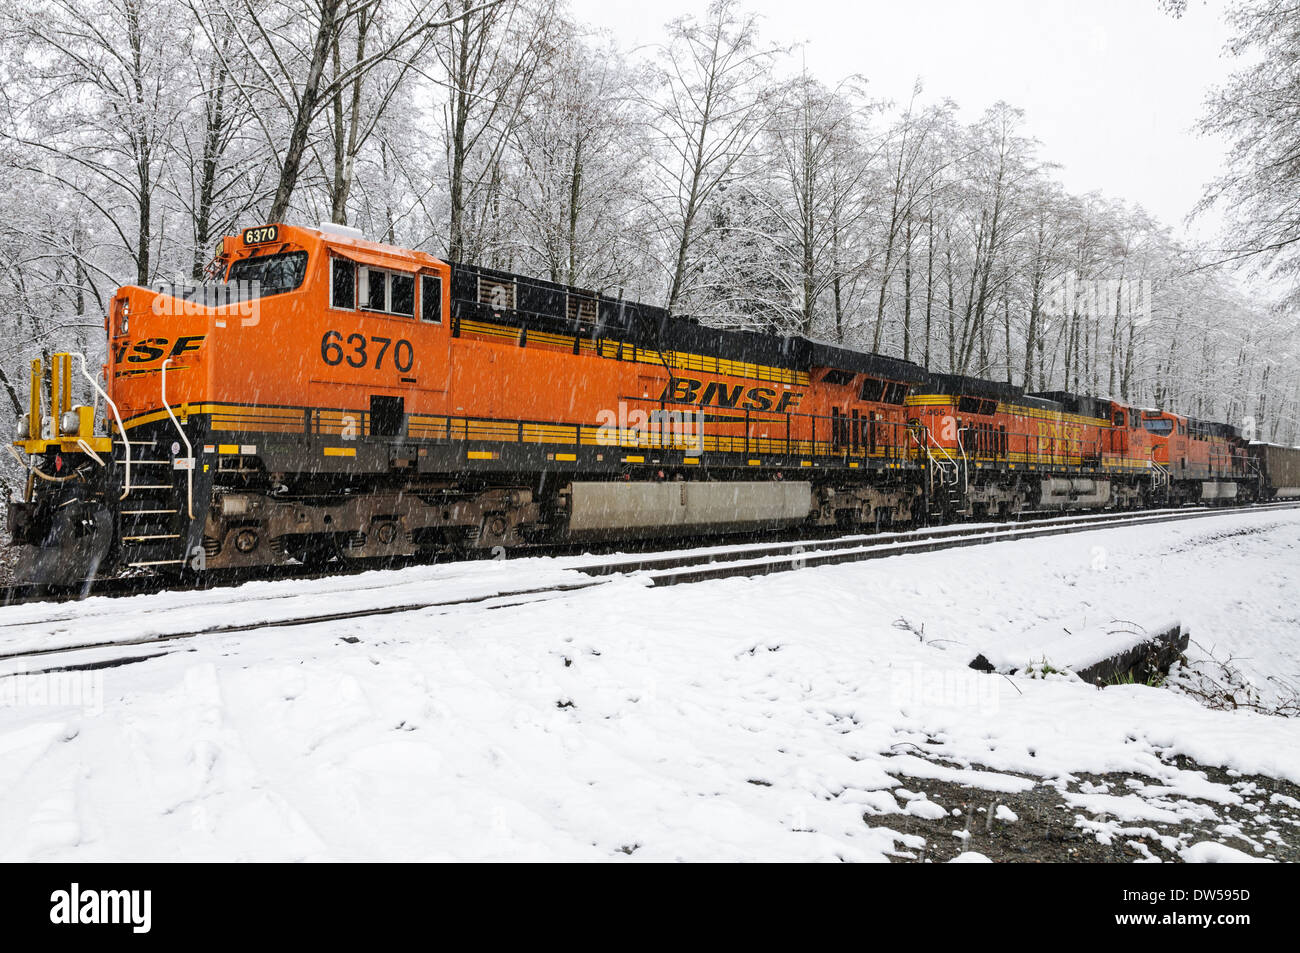 BNSF Railway locomotives and coal cars parked and idling on a rail siding during a snow storm in Delta, B.C. Canada. Stock Photo